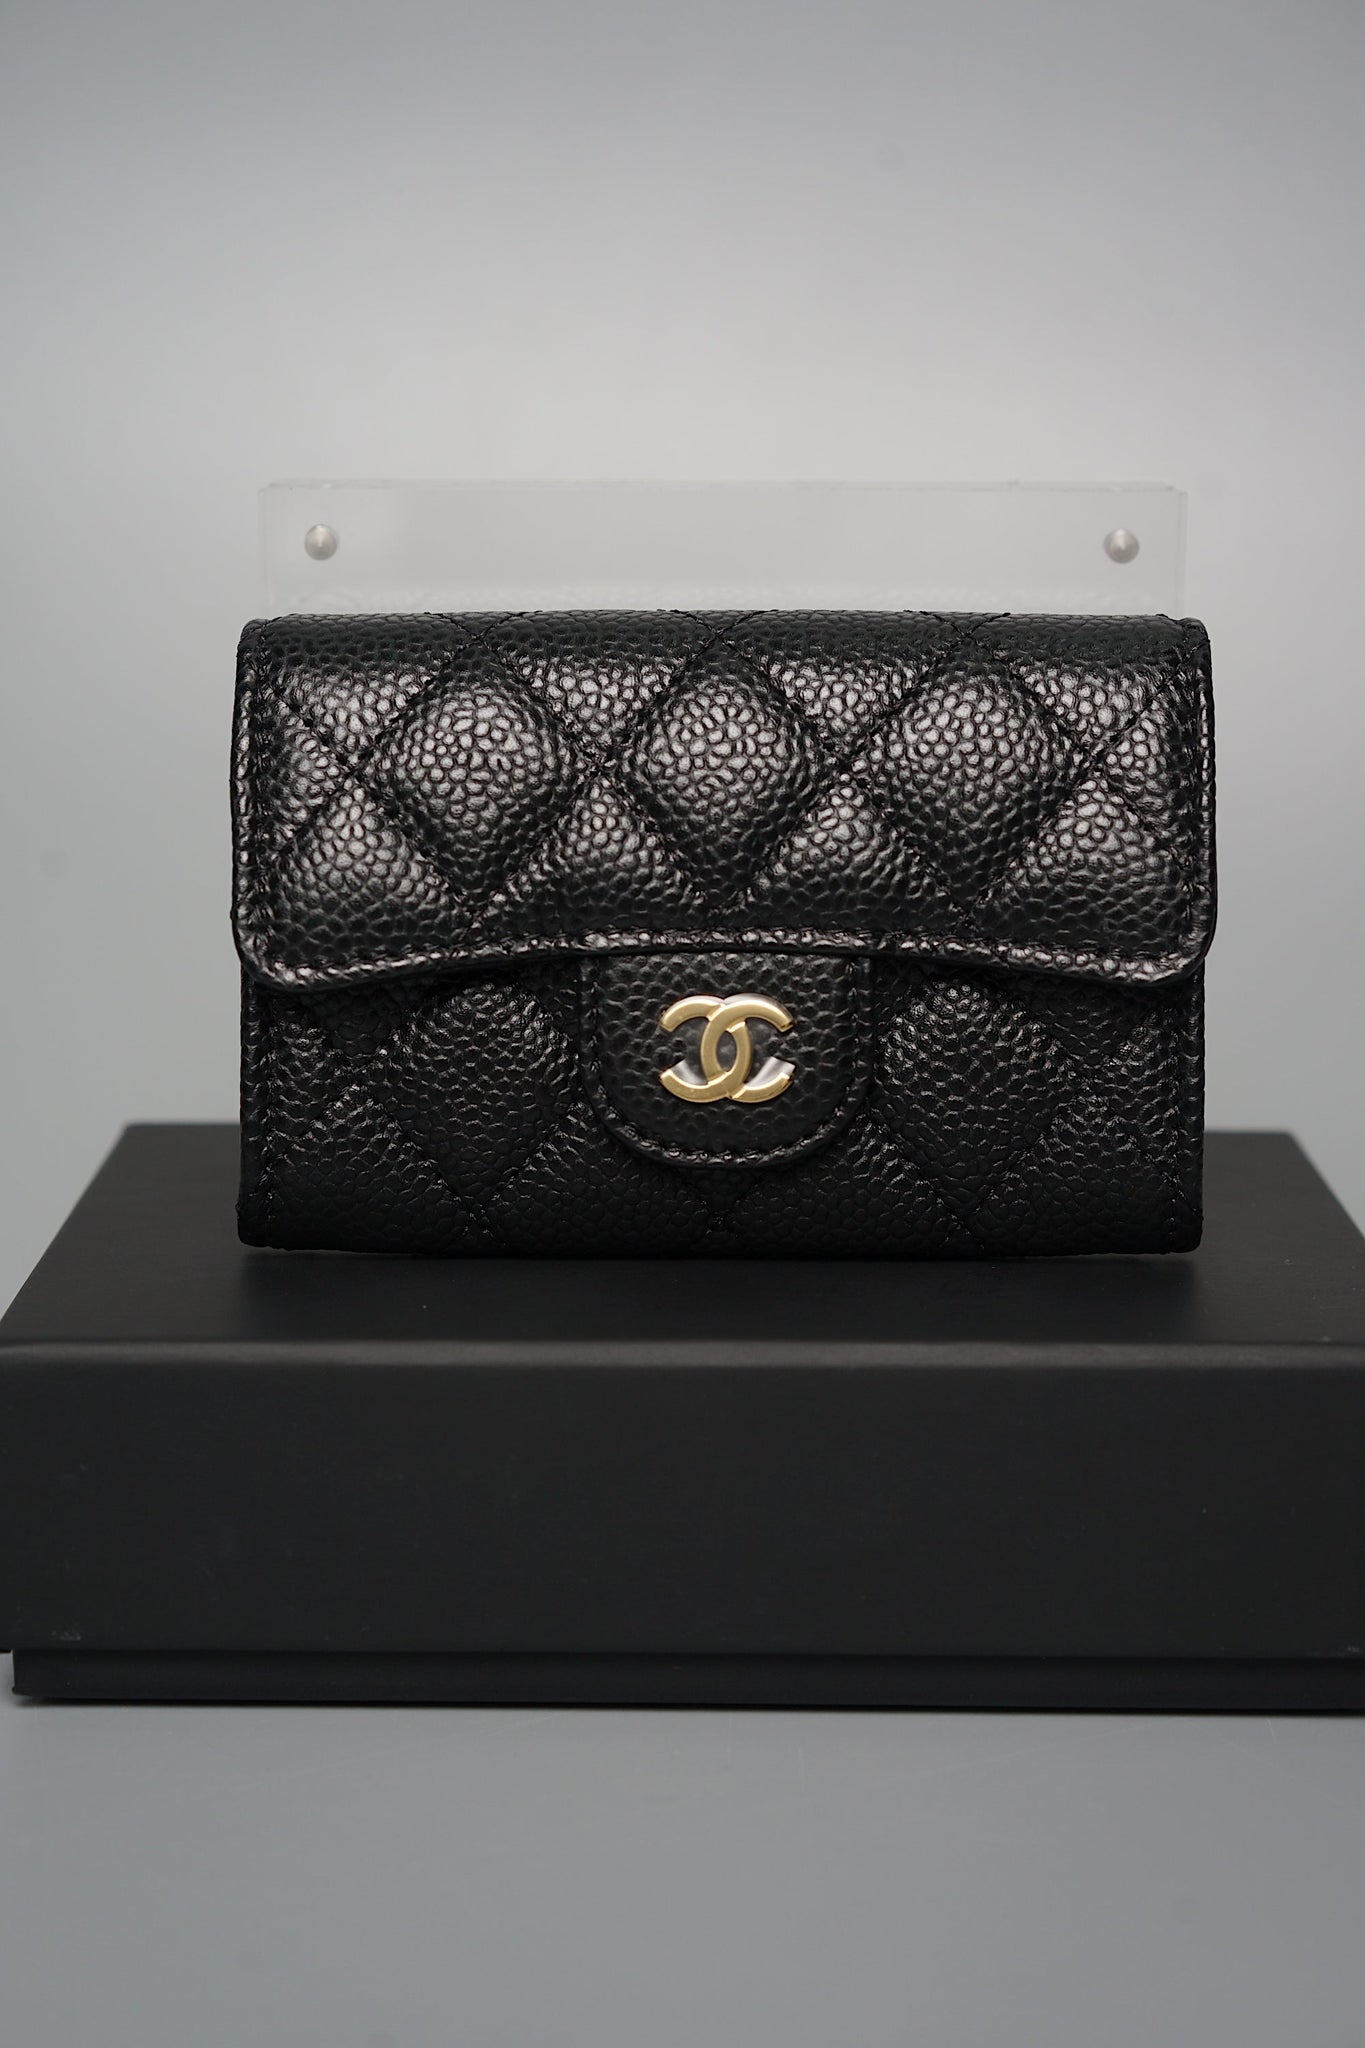 Chanel Compact Cardholder Wallet in Black Caviar Ghw (Brand New)